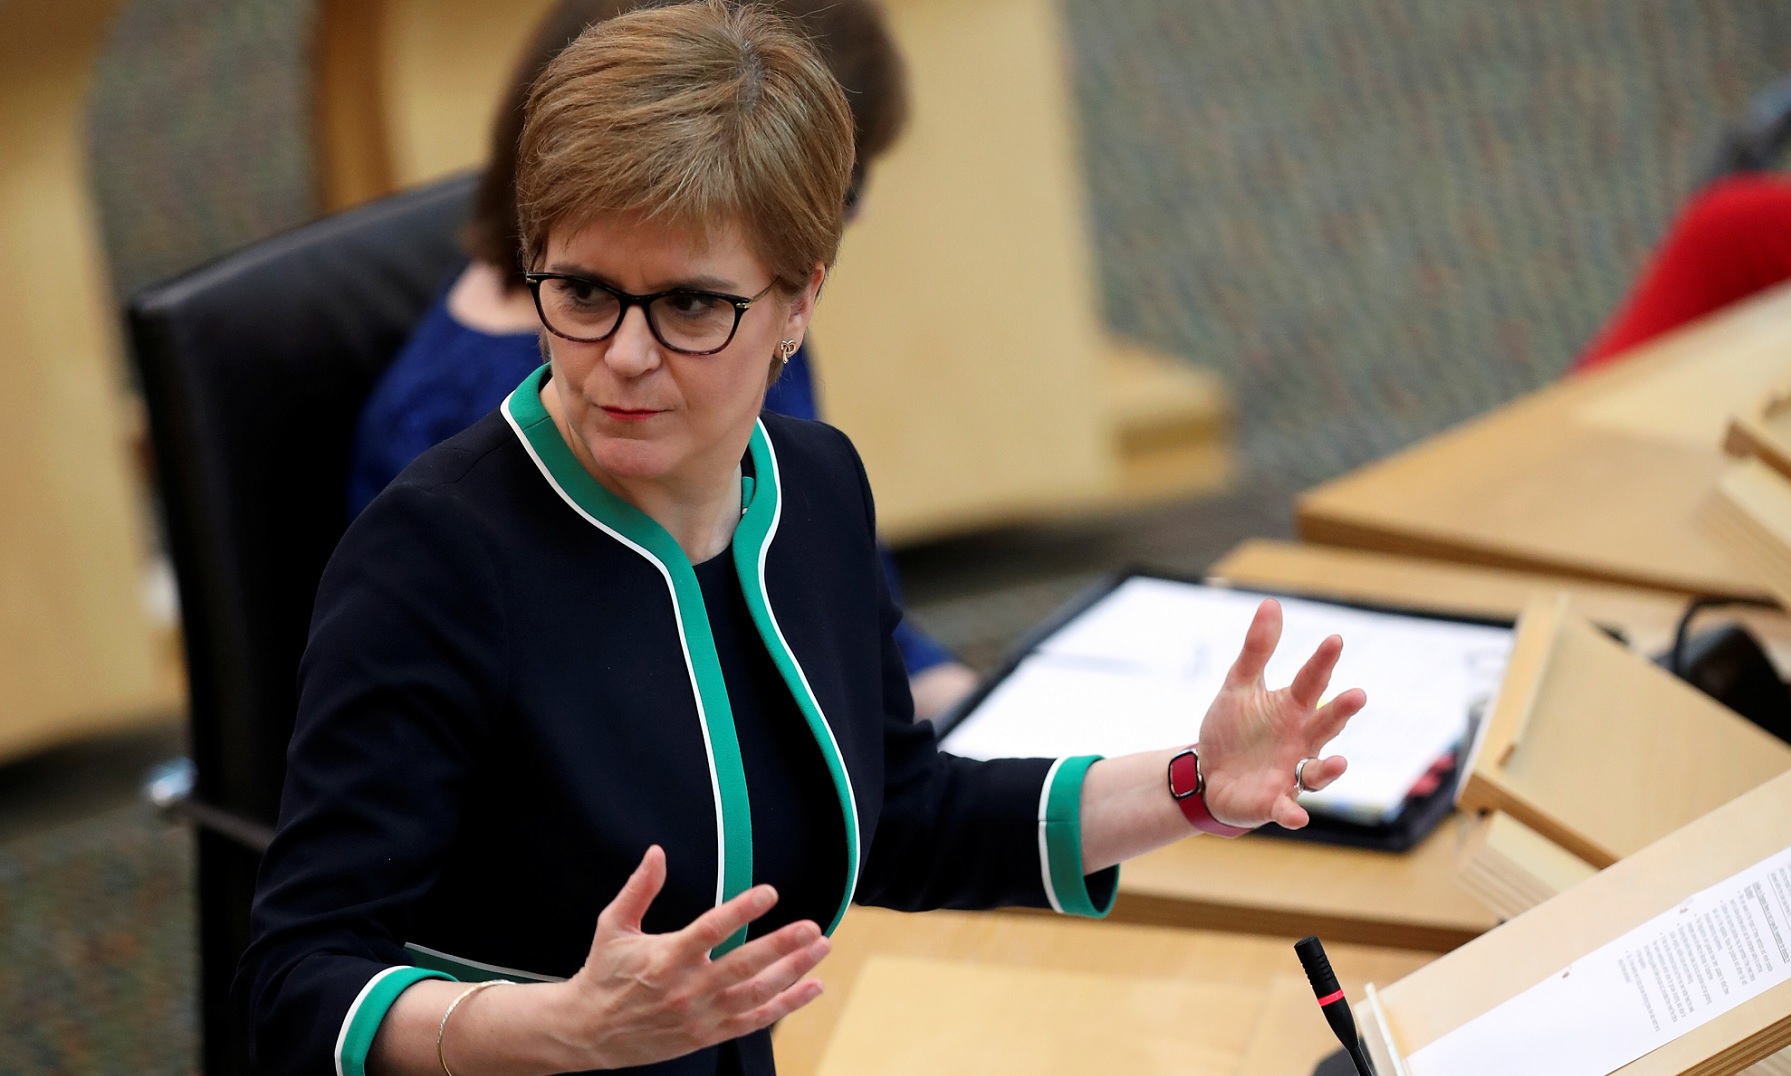 Sturgeon has previously indicated she would be likely to give an announcement this Tuesday.